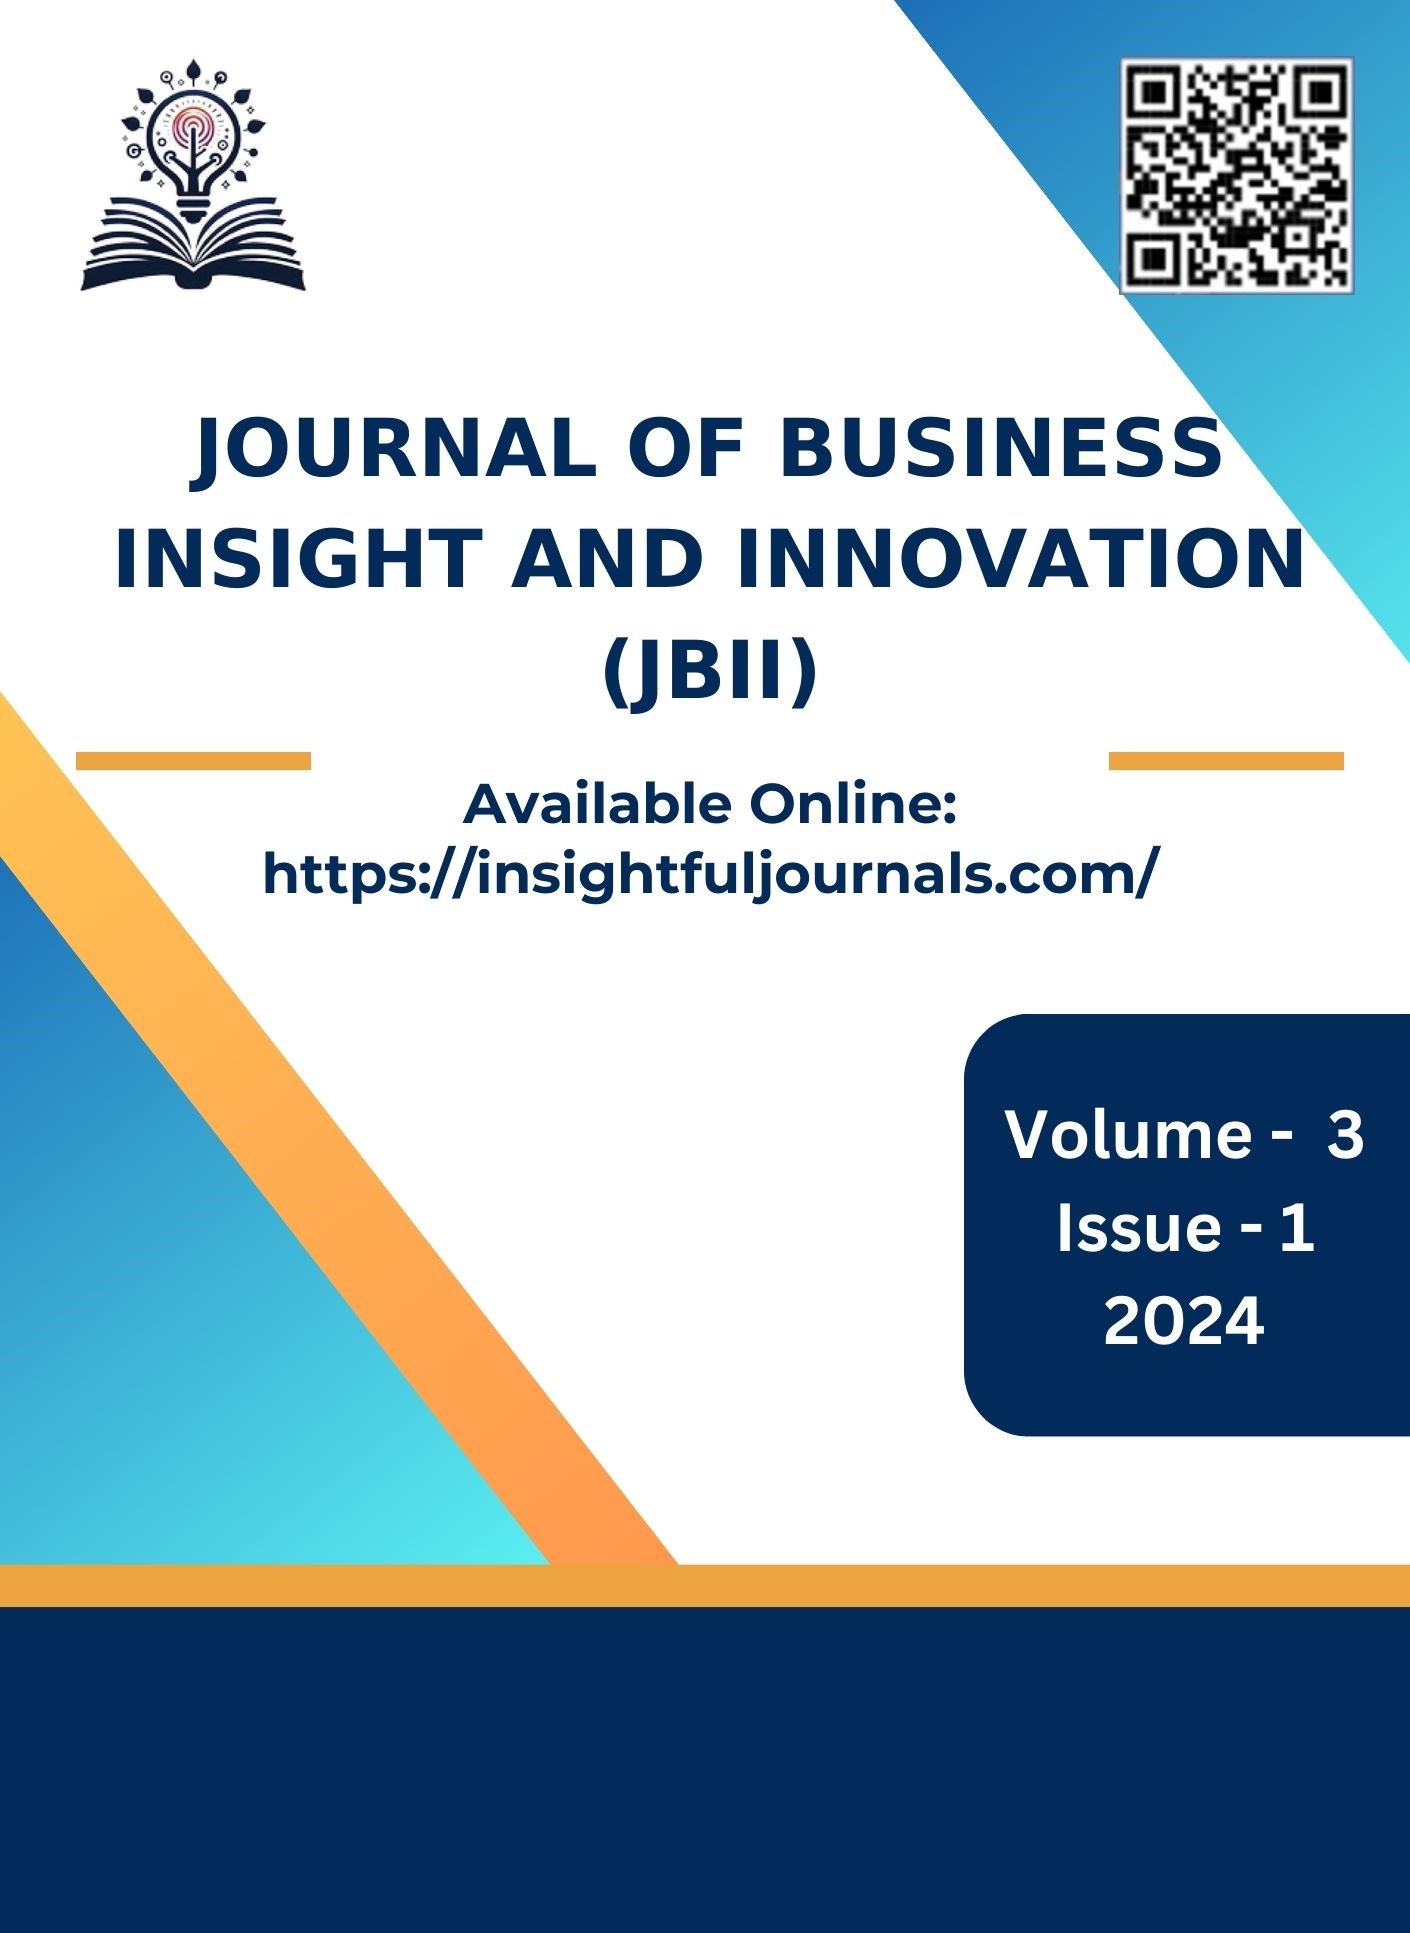 					View Vol. 3 No. 1 (2024): Journal of Business Insight and Innovation
				